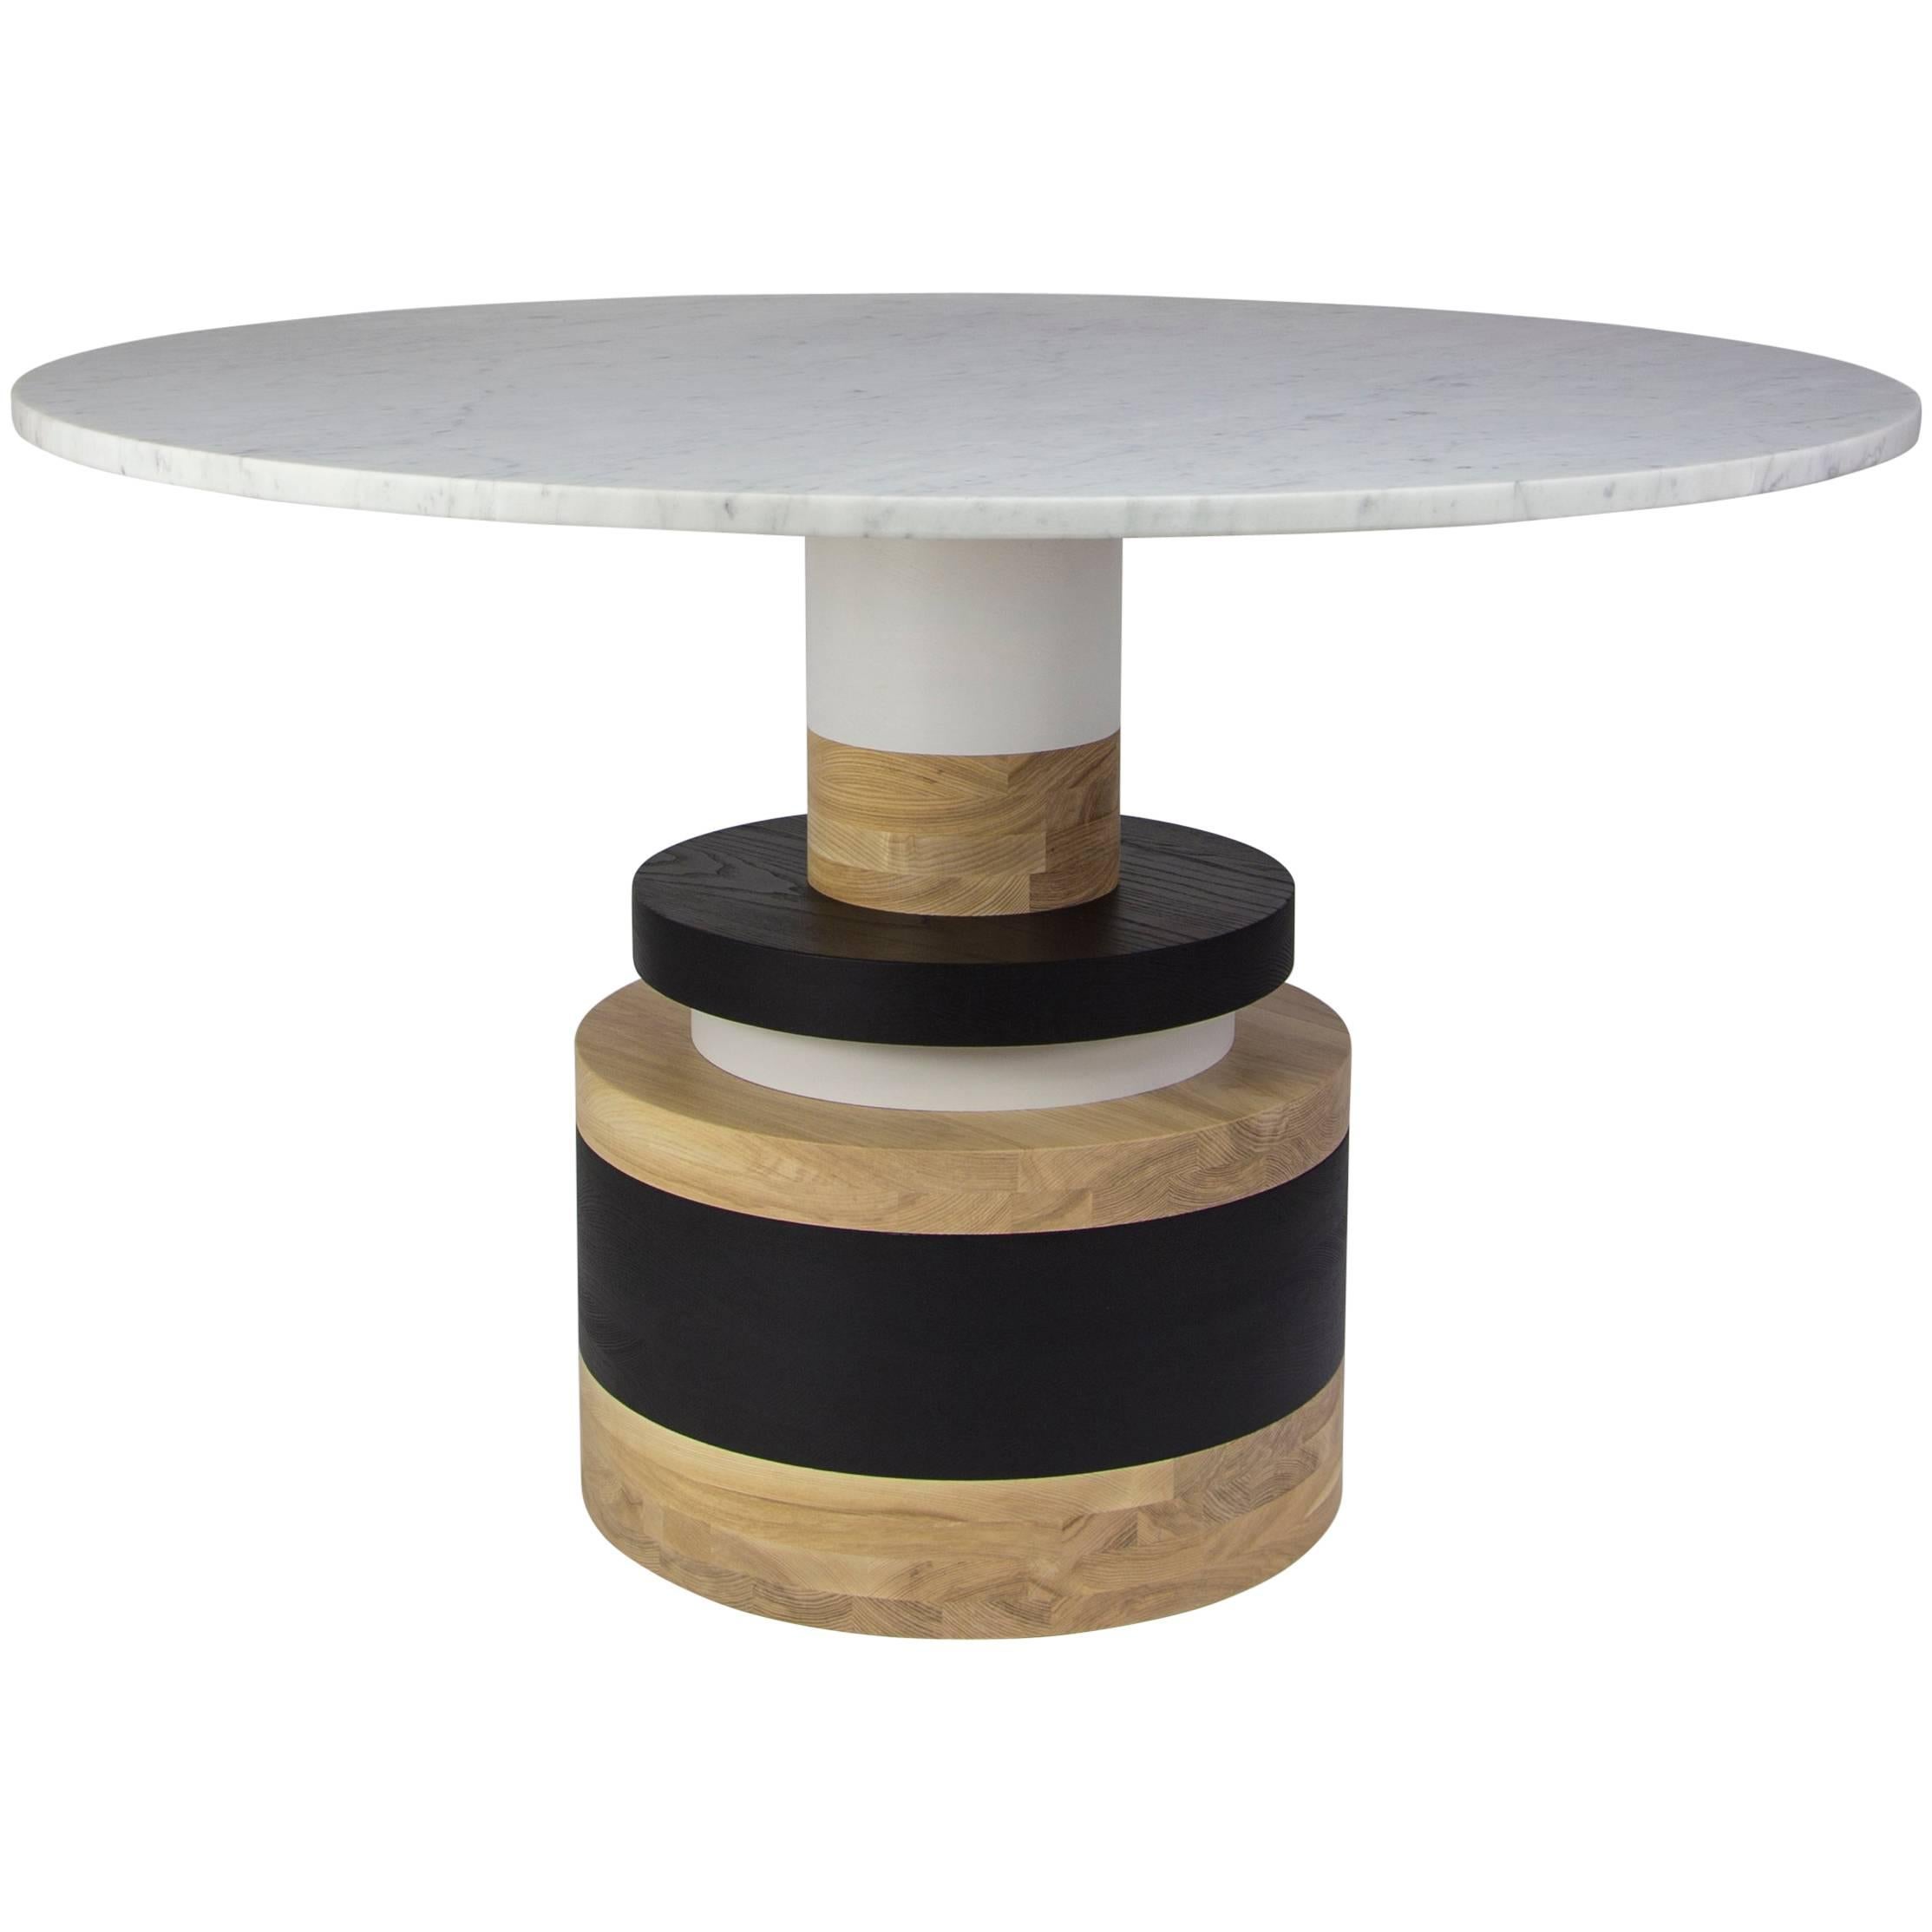 The Sottsass-inspired “Sass Dining Table” is a bold, graphic statement piece. A polished Nero Marquina marble top sits on an Amish-made base composed of painted and stacked wood circles. 

The version as shown is 54